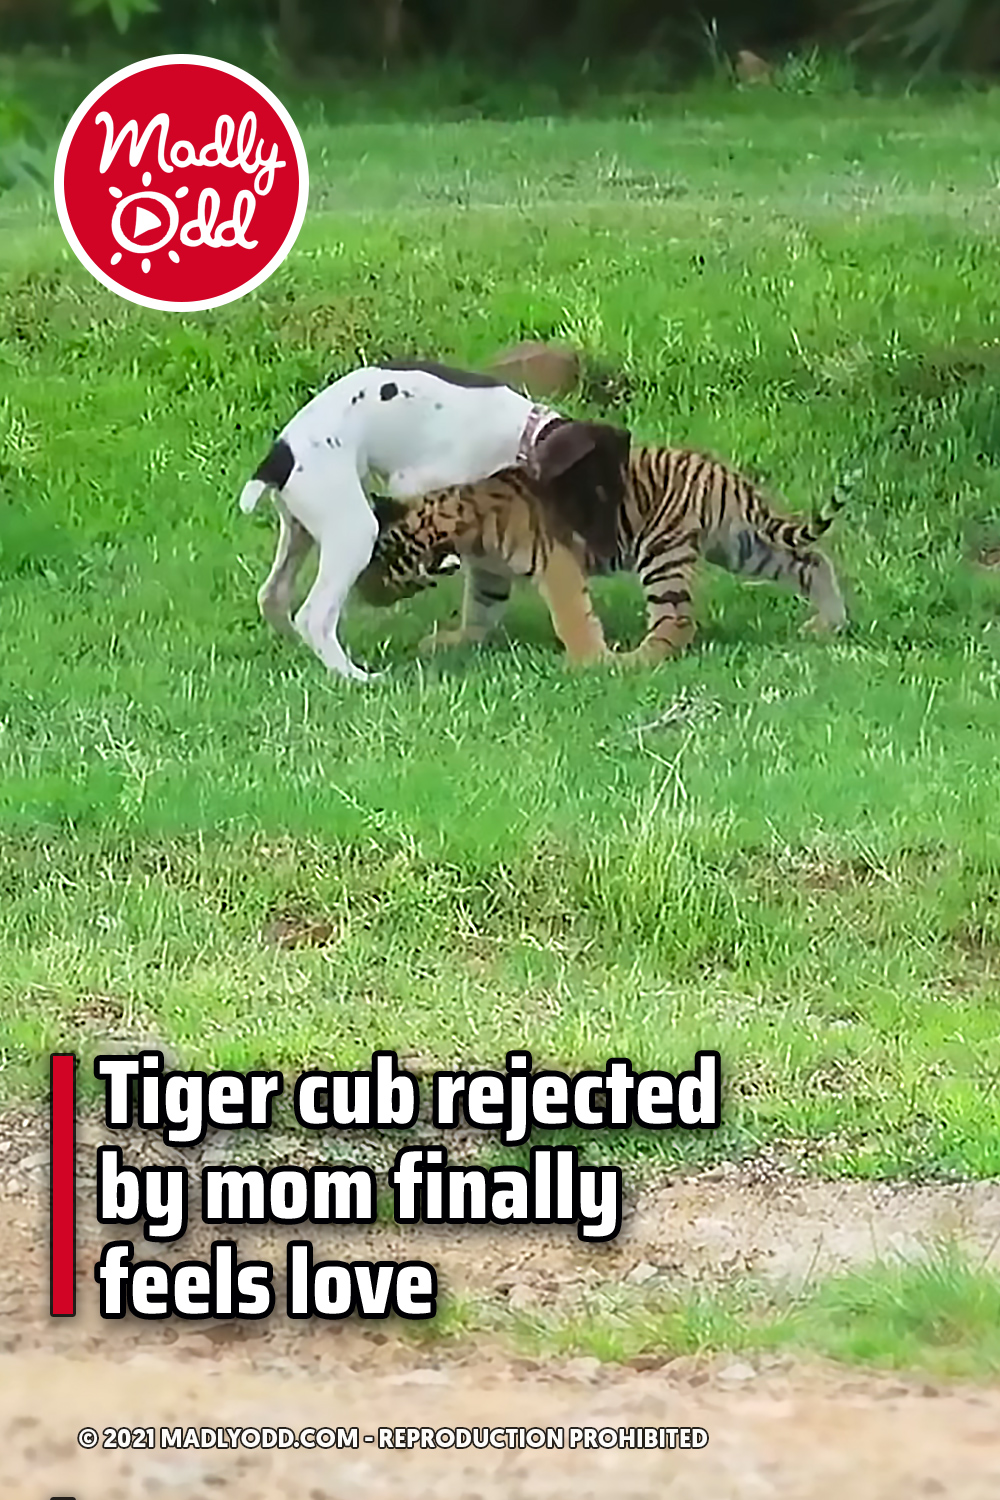 Tiger cub rejected by mom finally feels love